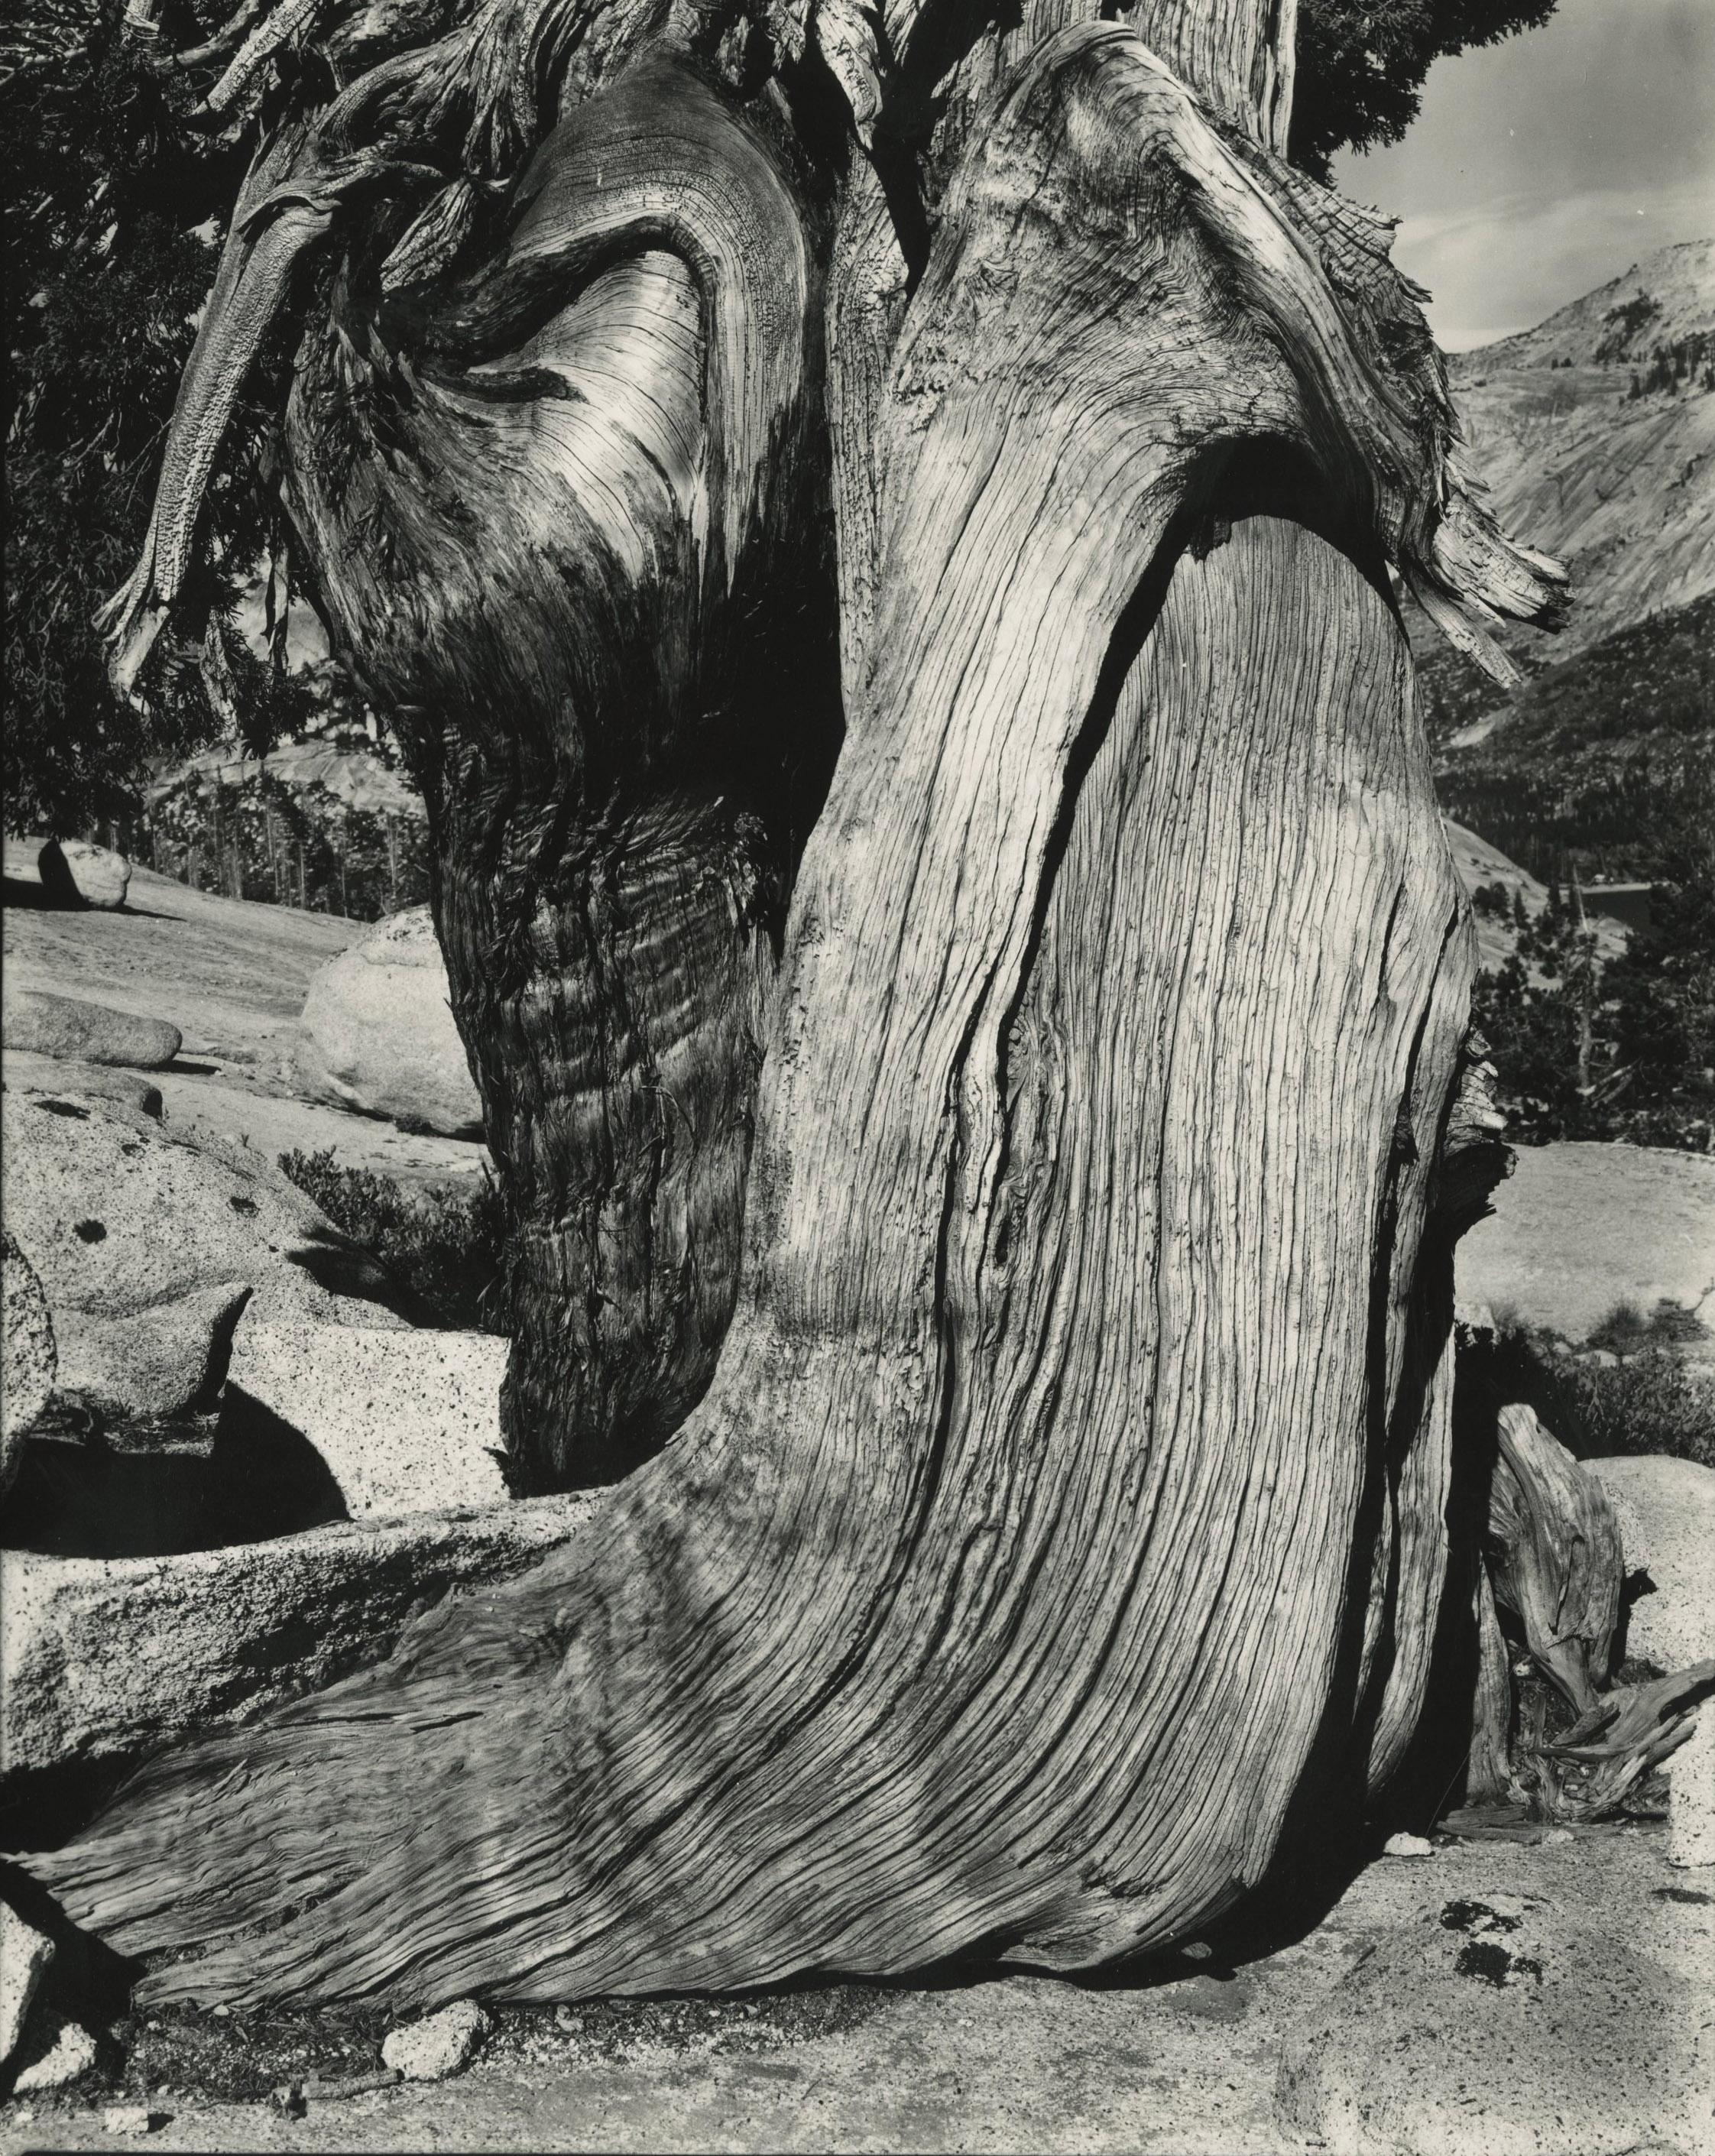 Why is Edward Weston so important in the world of photography?